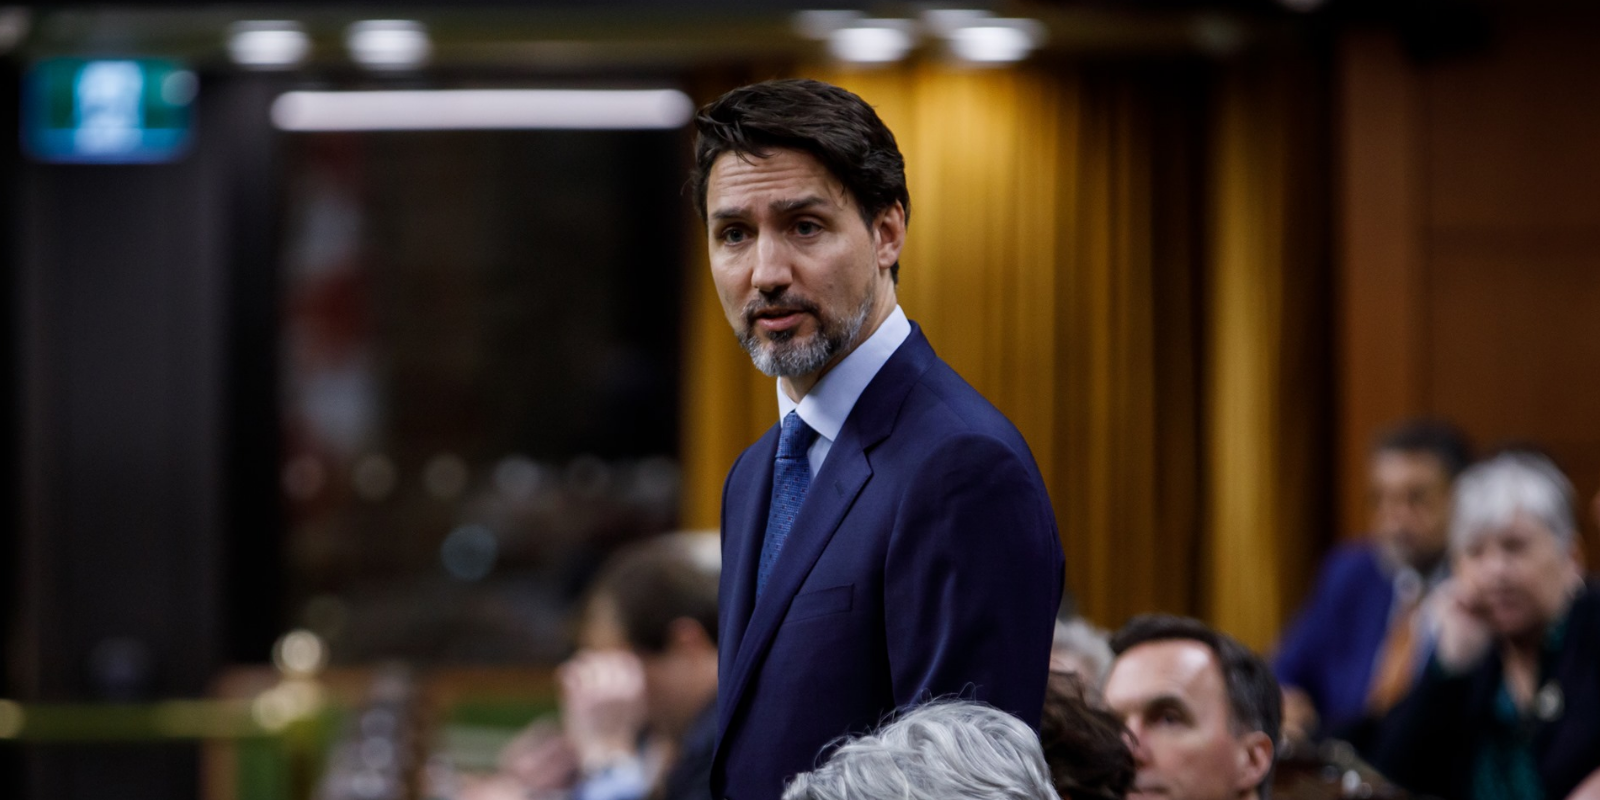 WATCH: Trudeau addresses 'Justinflation' during Question Period